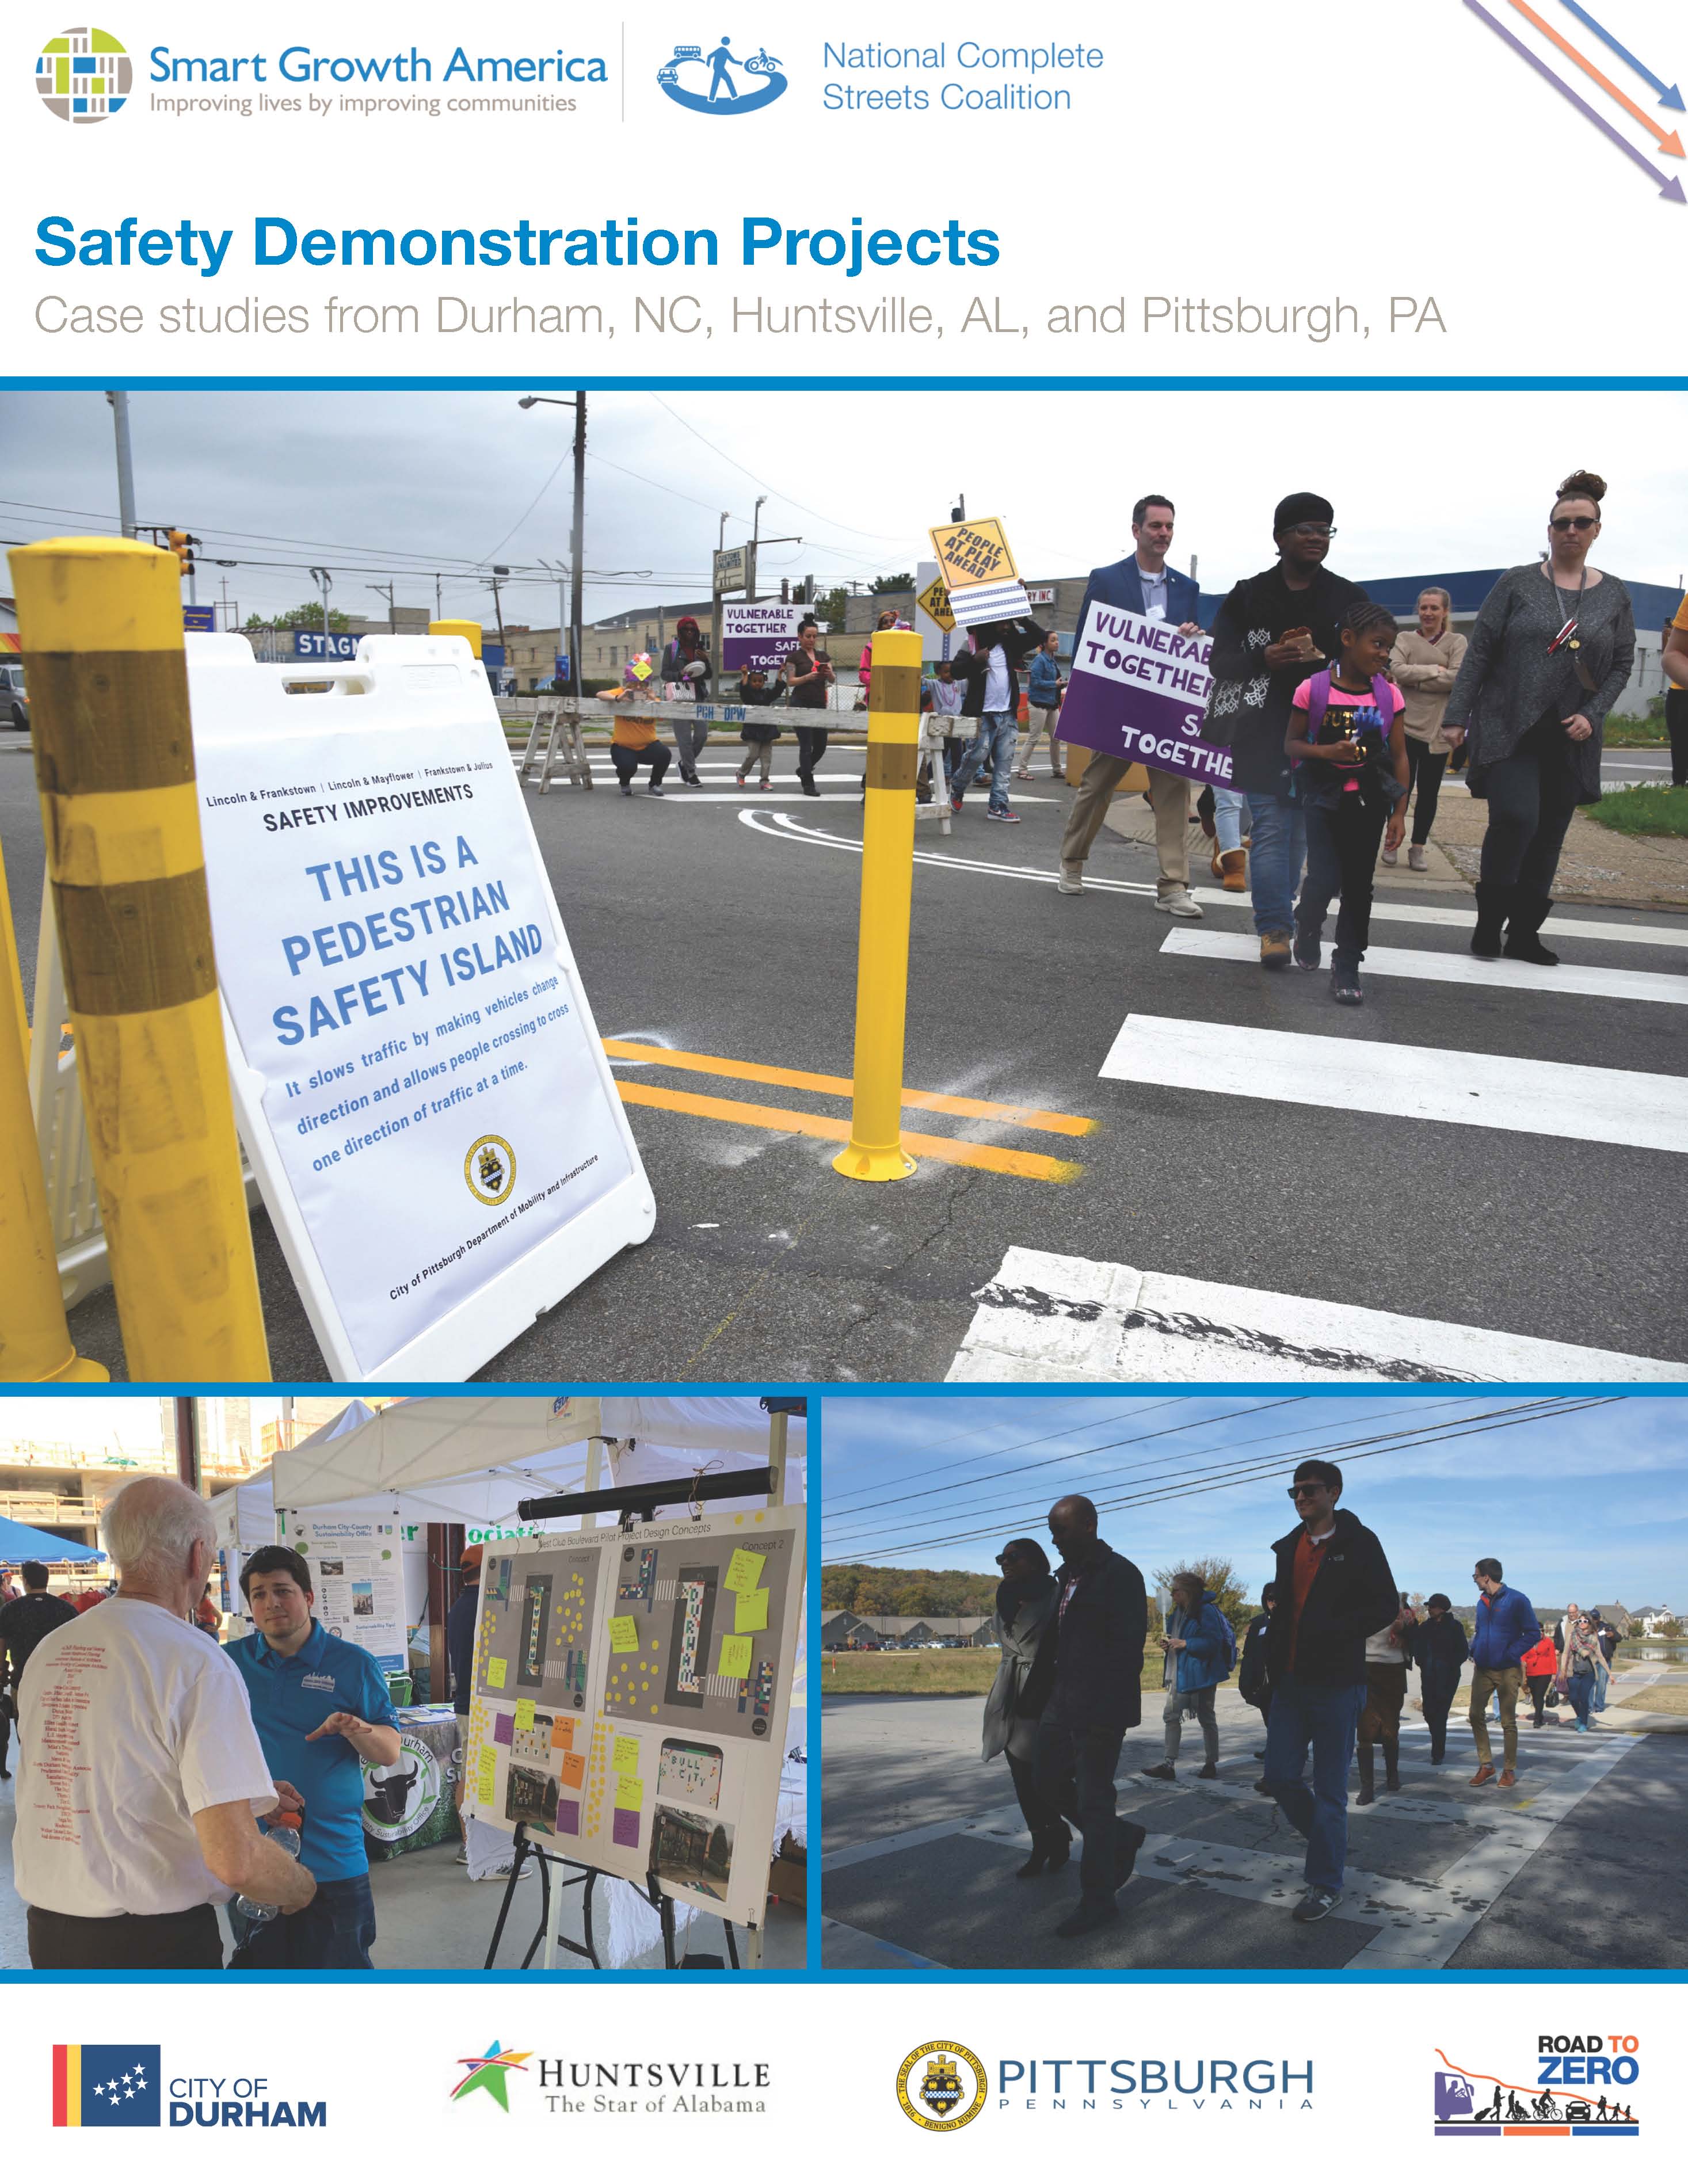 Safety Demonstration Projects: Case studies from Durham, NC, Huntsville, AL, and Pittsburgh, PA